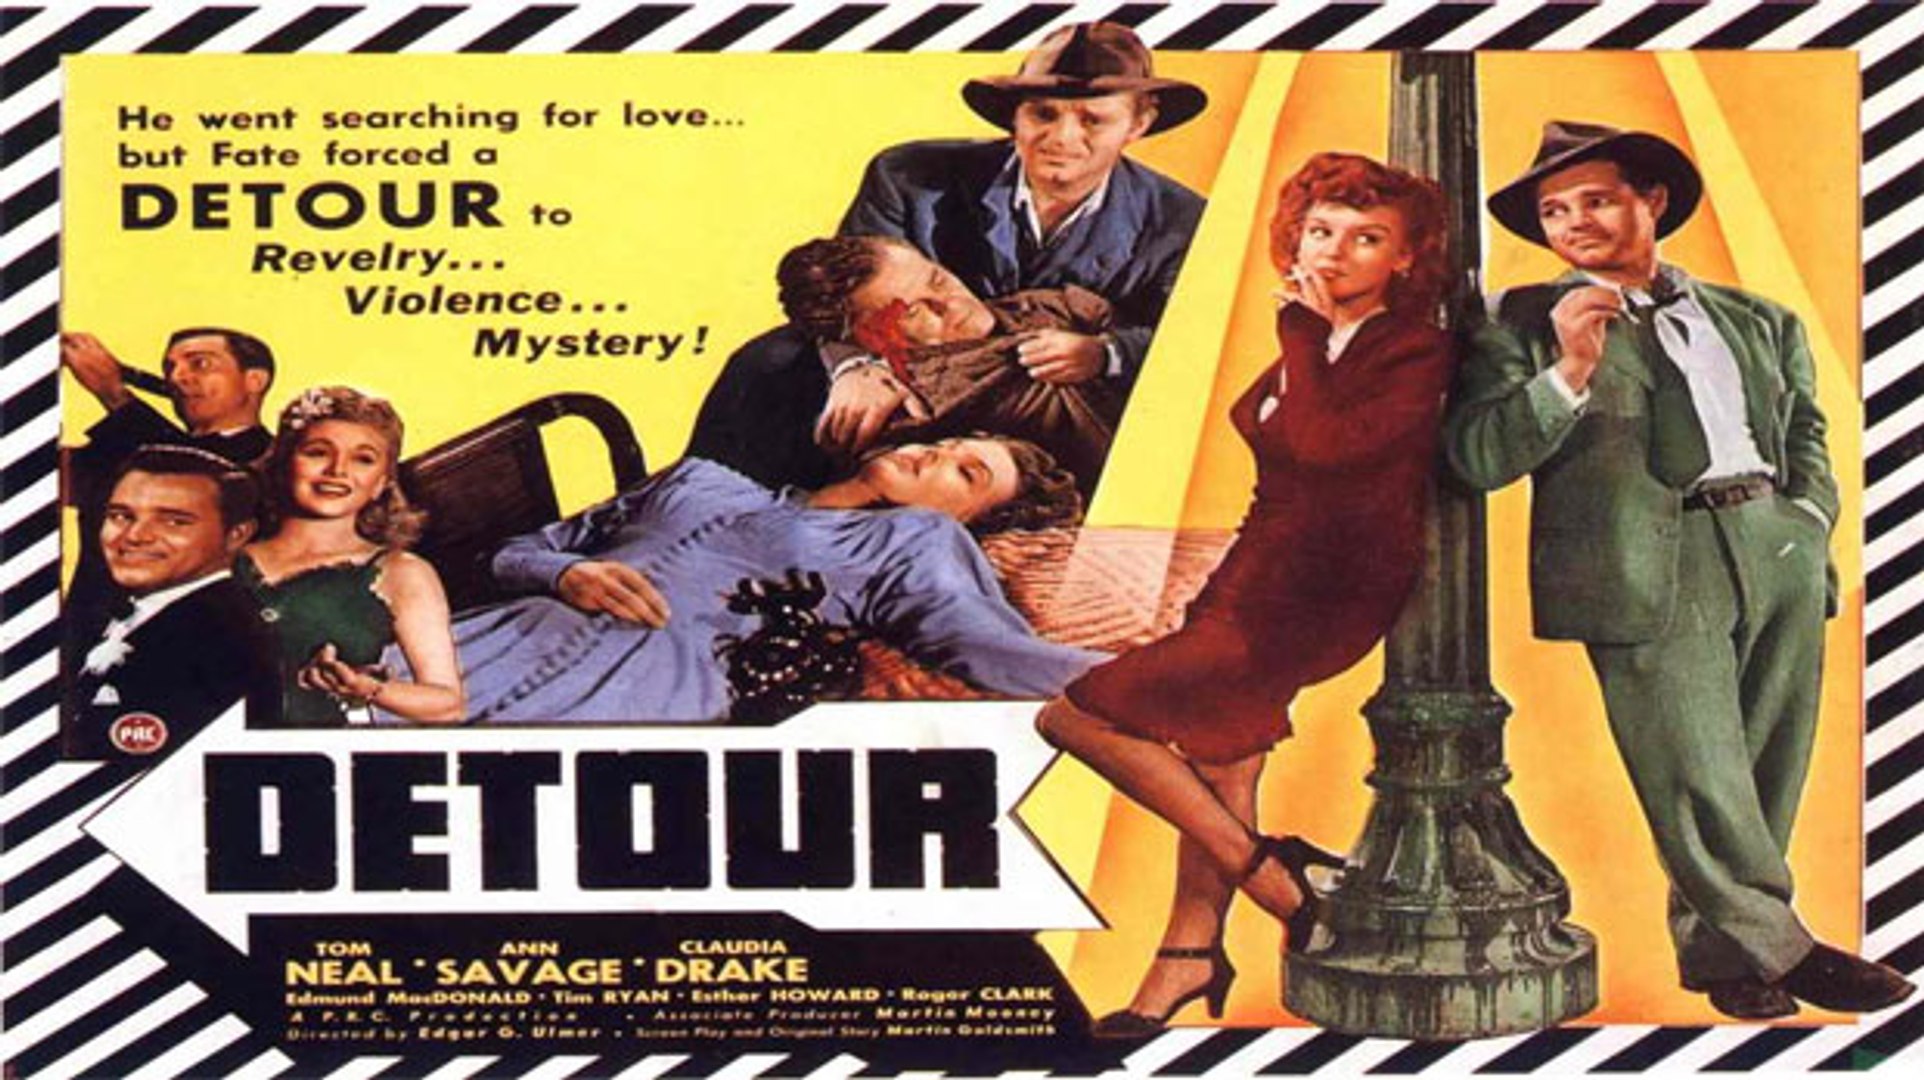 43-facts-about-the-movie-detour